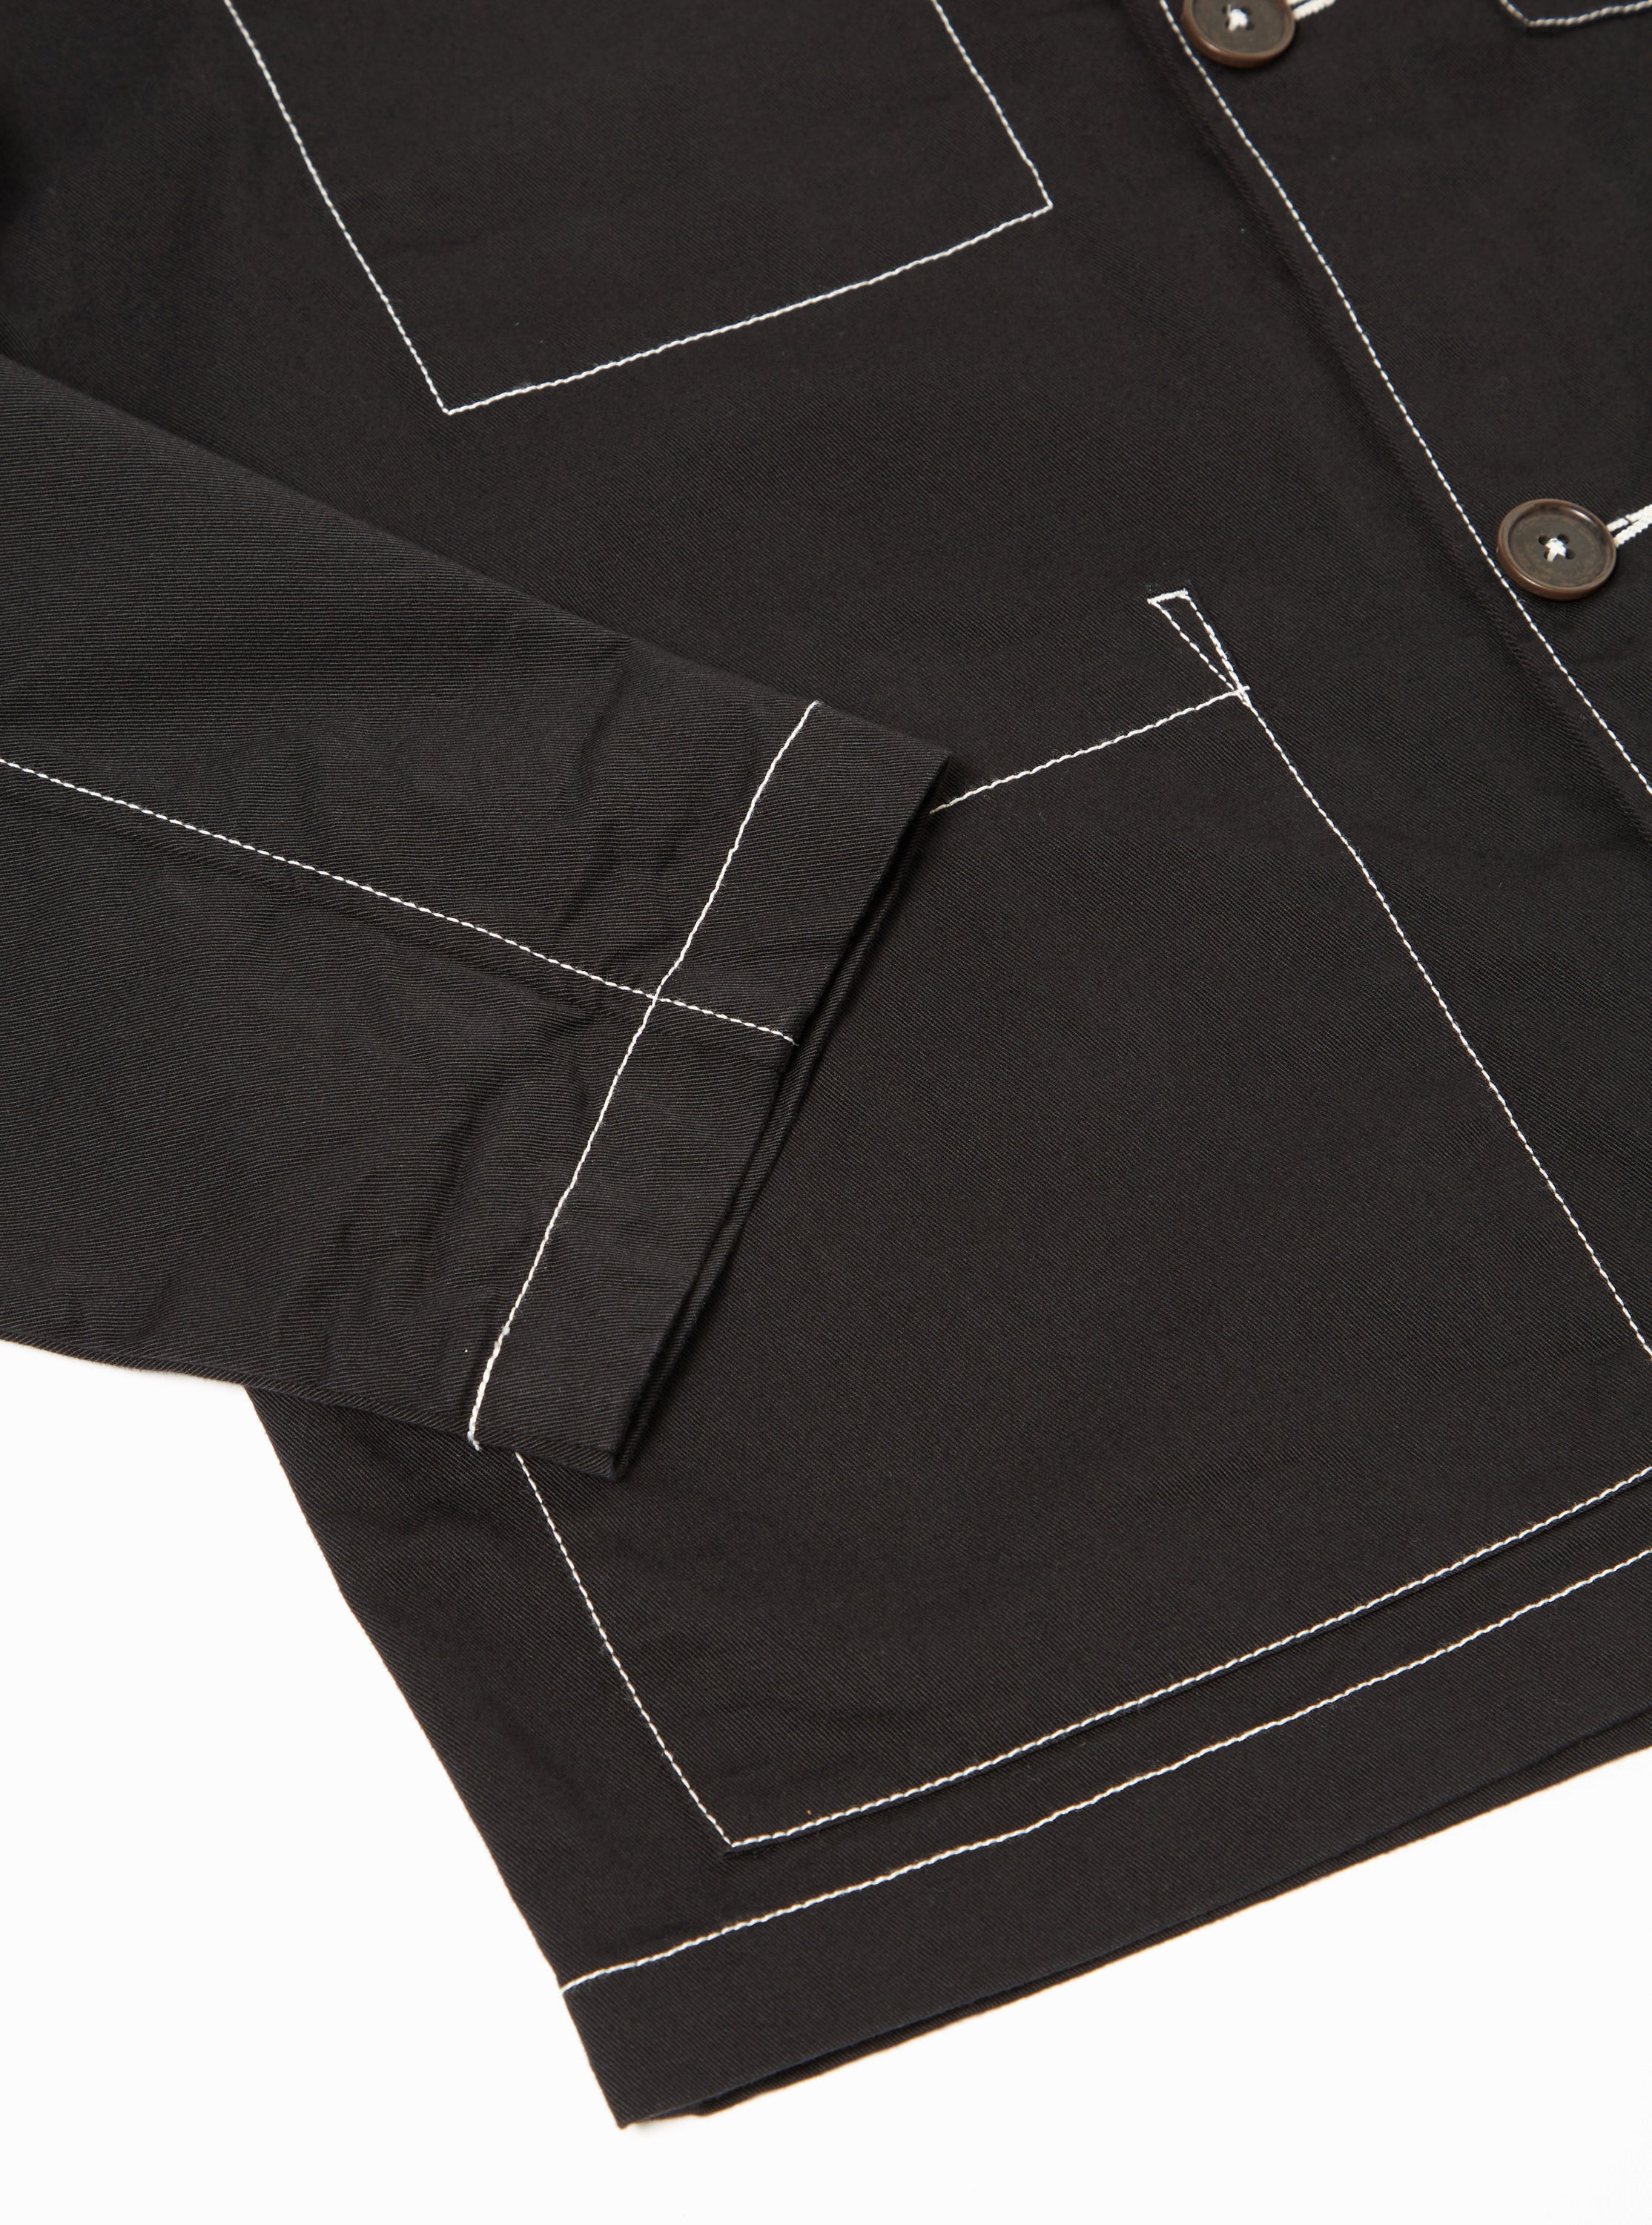 Universal Works Coverall Jacket in Black Twill